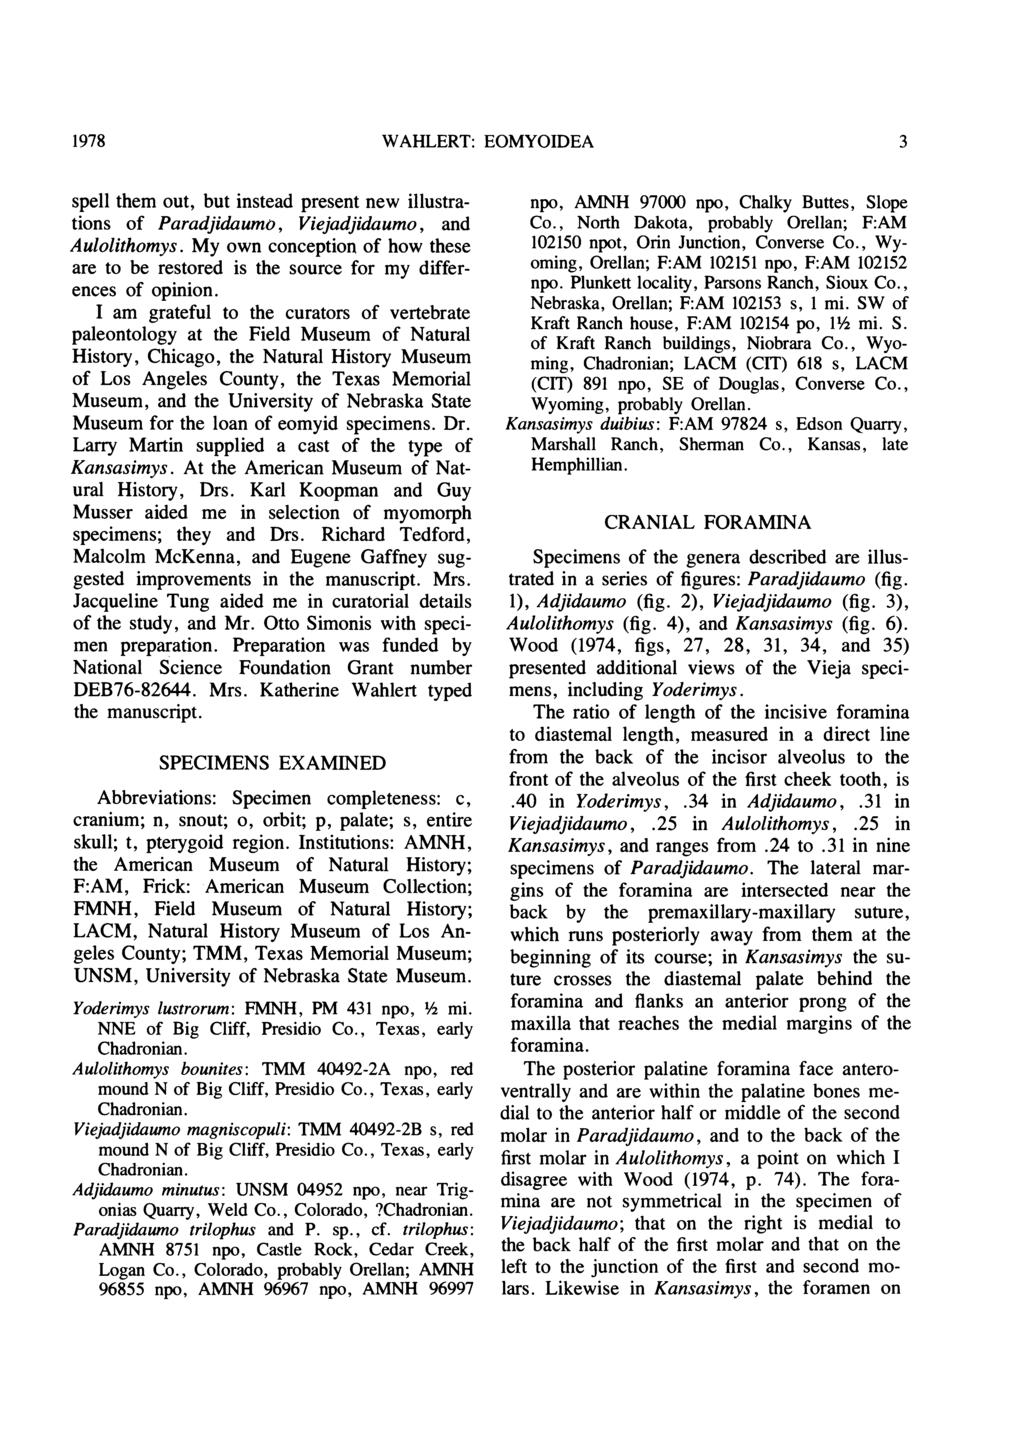 1978 WAHLERT: EOMYOIDEA 3 spell them out, but instead present new illustrations of Paradjidaumo, Viejadjidaumo, and Aulolithomys.